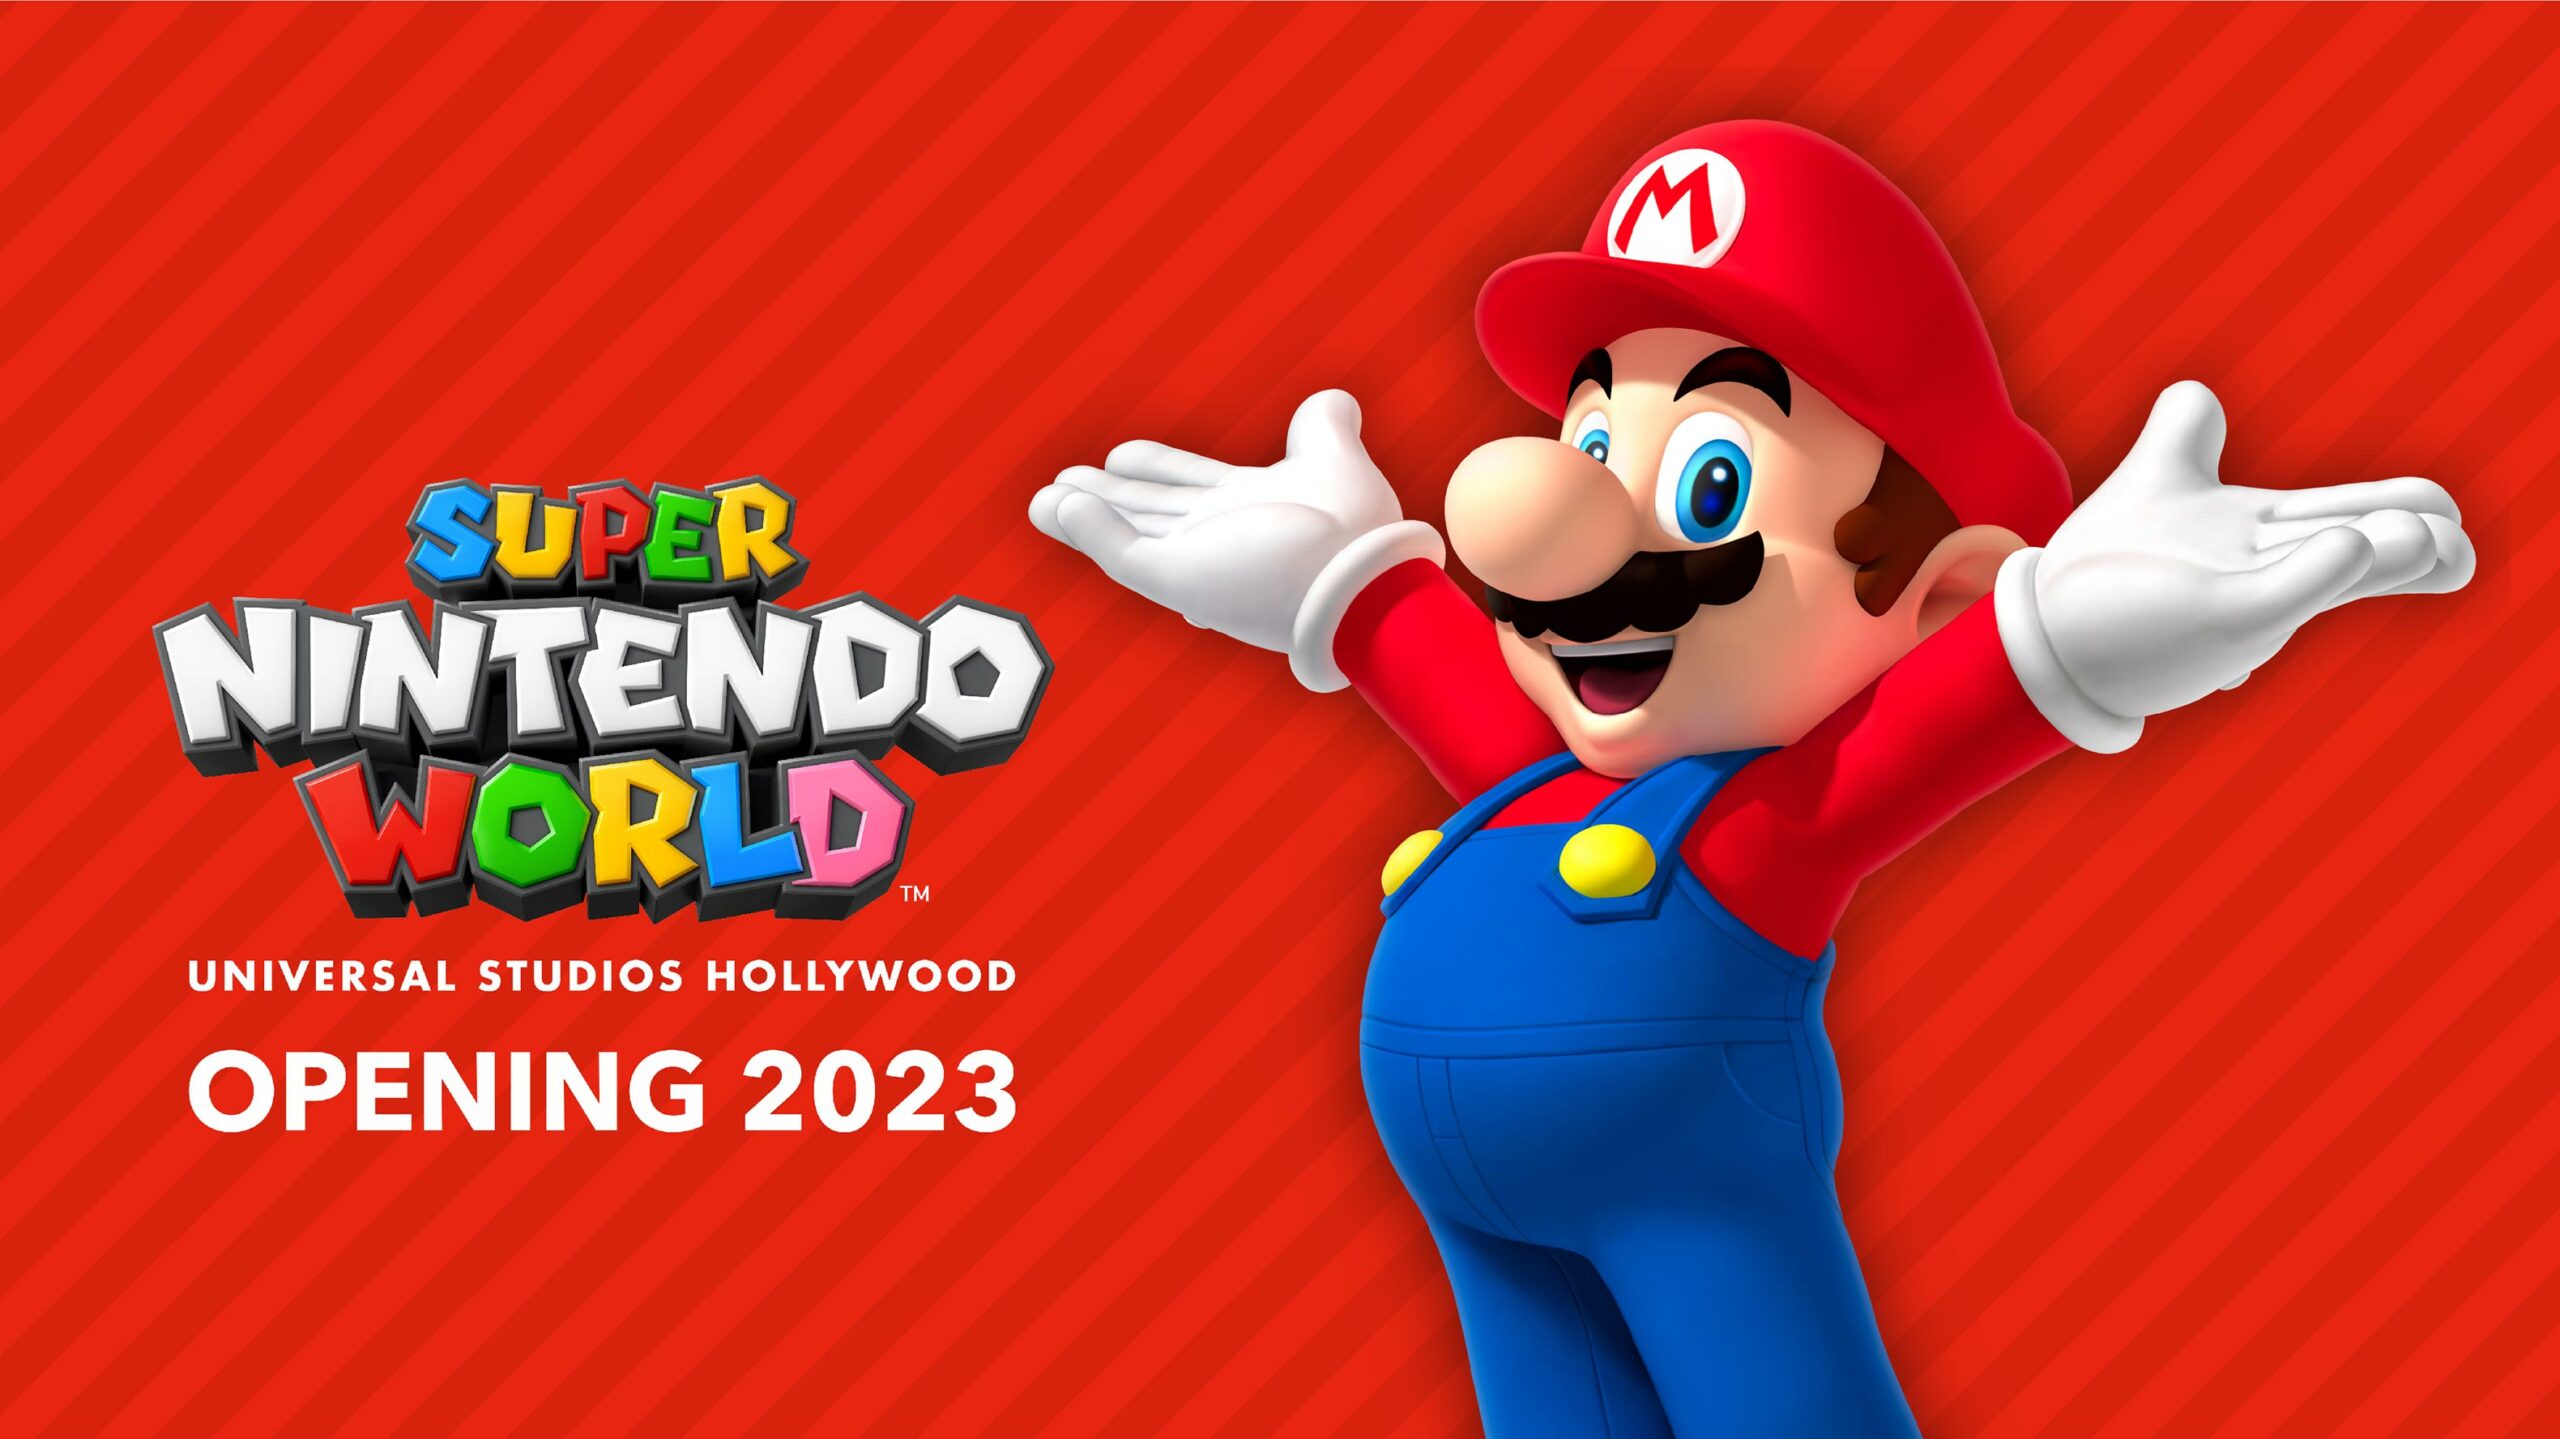 Super Nintendo World to open in Hollywood in 2023 thumbnail